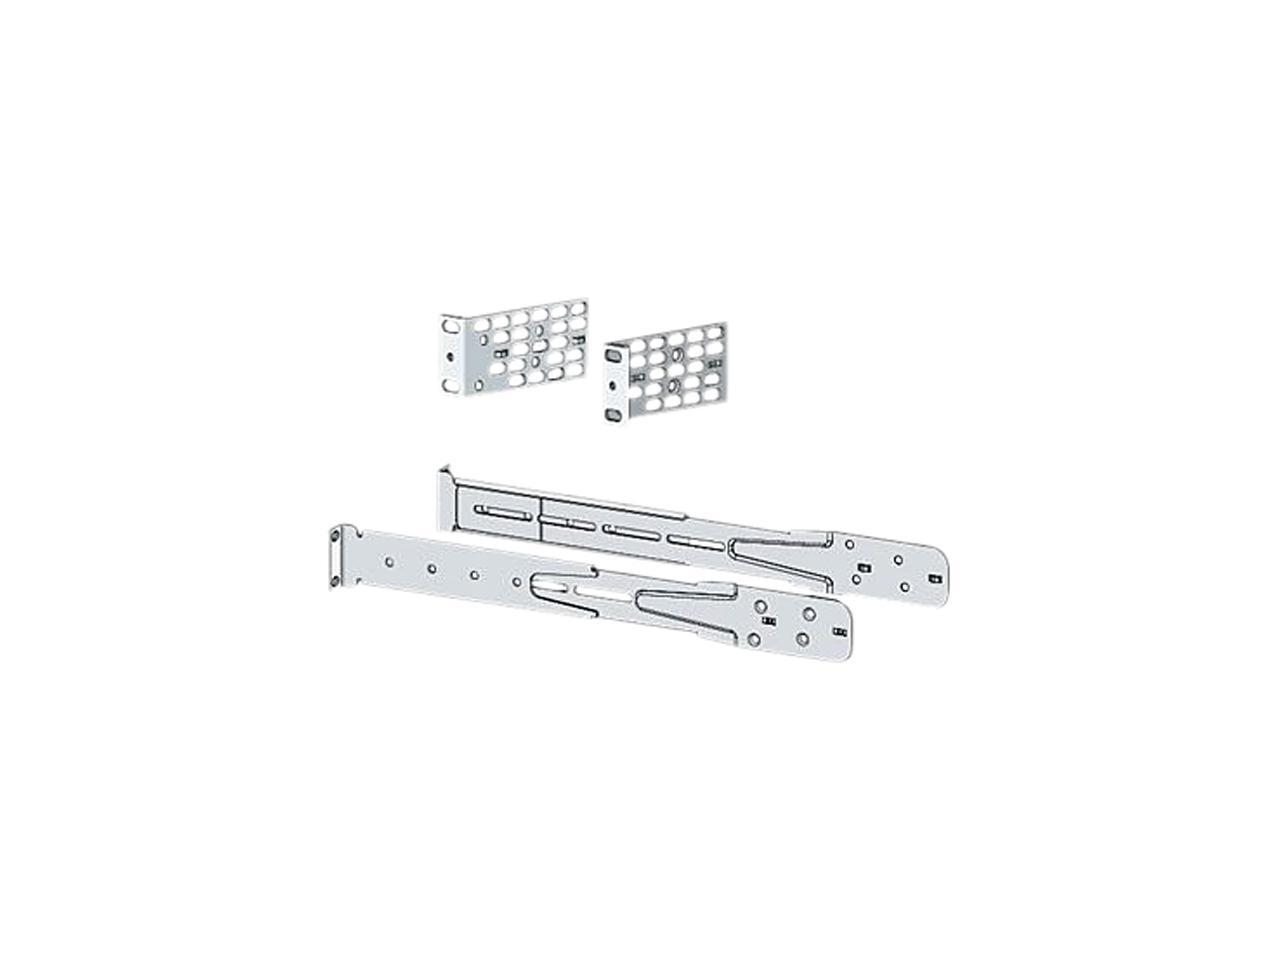 CISCO C3850-4PT-KIT= Extension rails and brackets for four-point mounting for Cisco Catalyst 3850 Series